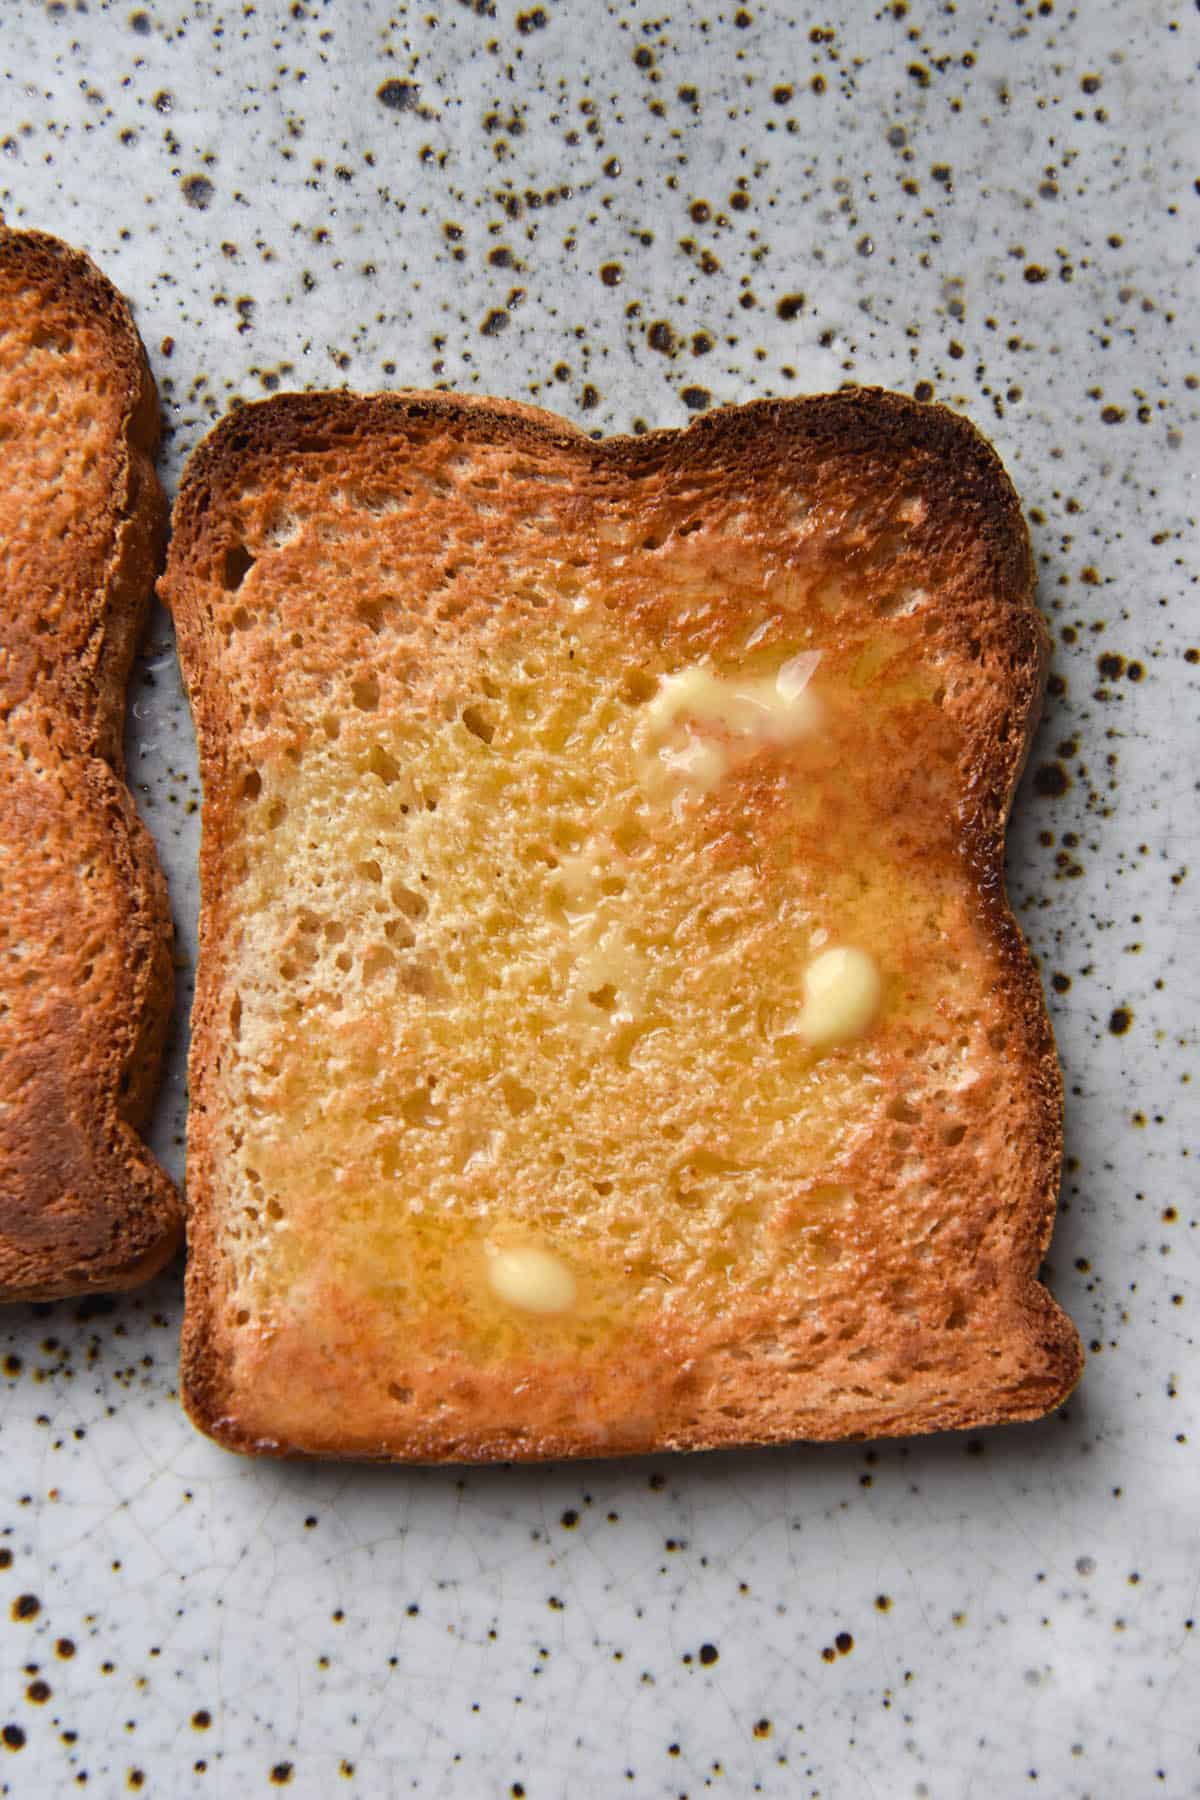 An aerial closed up view of two pieces of toasted grain free bread on a white speckled plate. The bread is golden brown and covered in pockets of melted butter